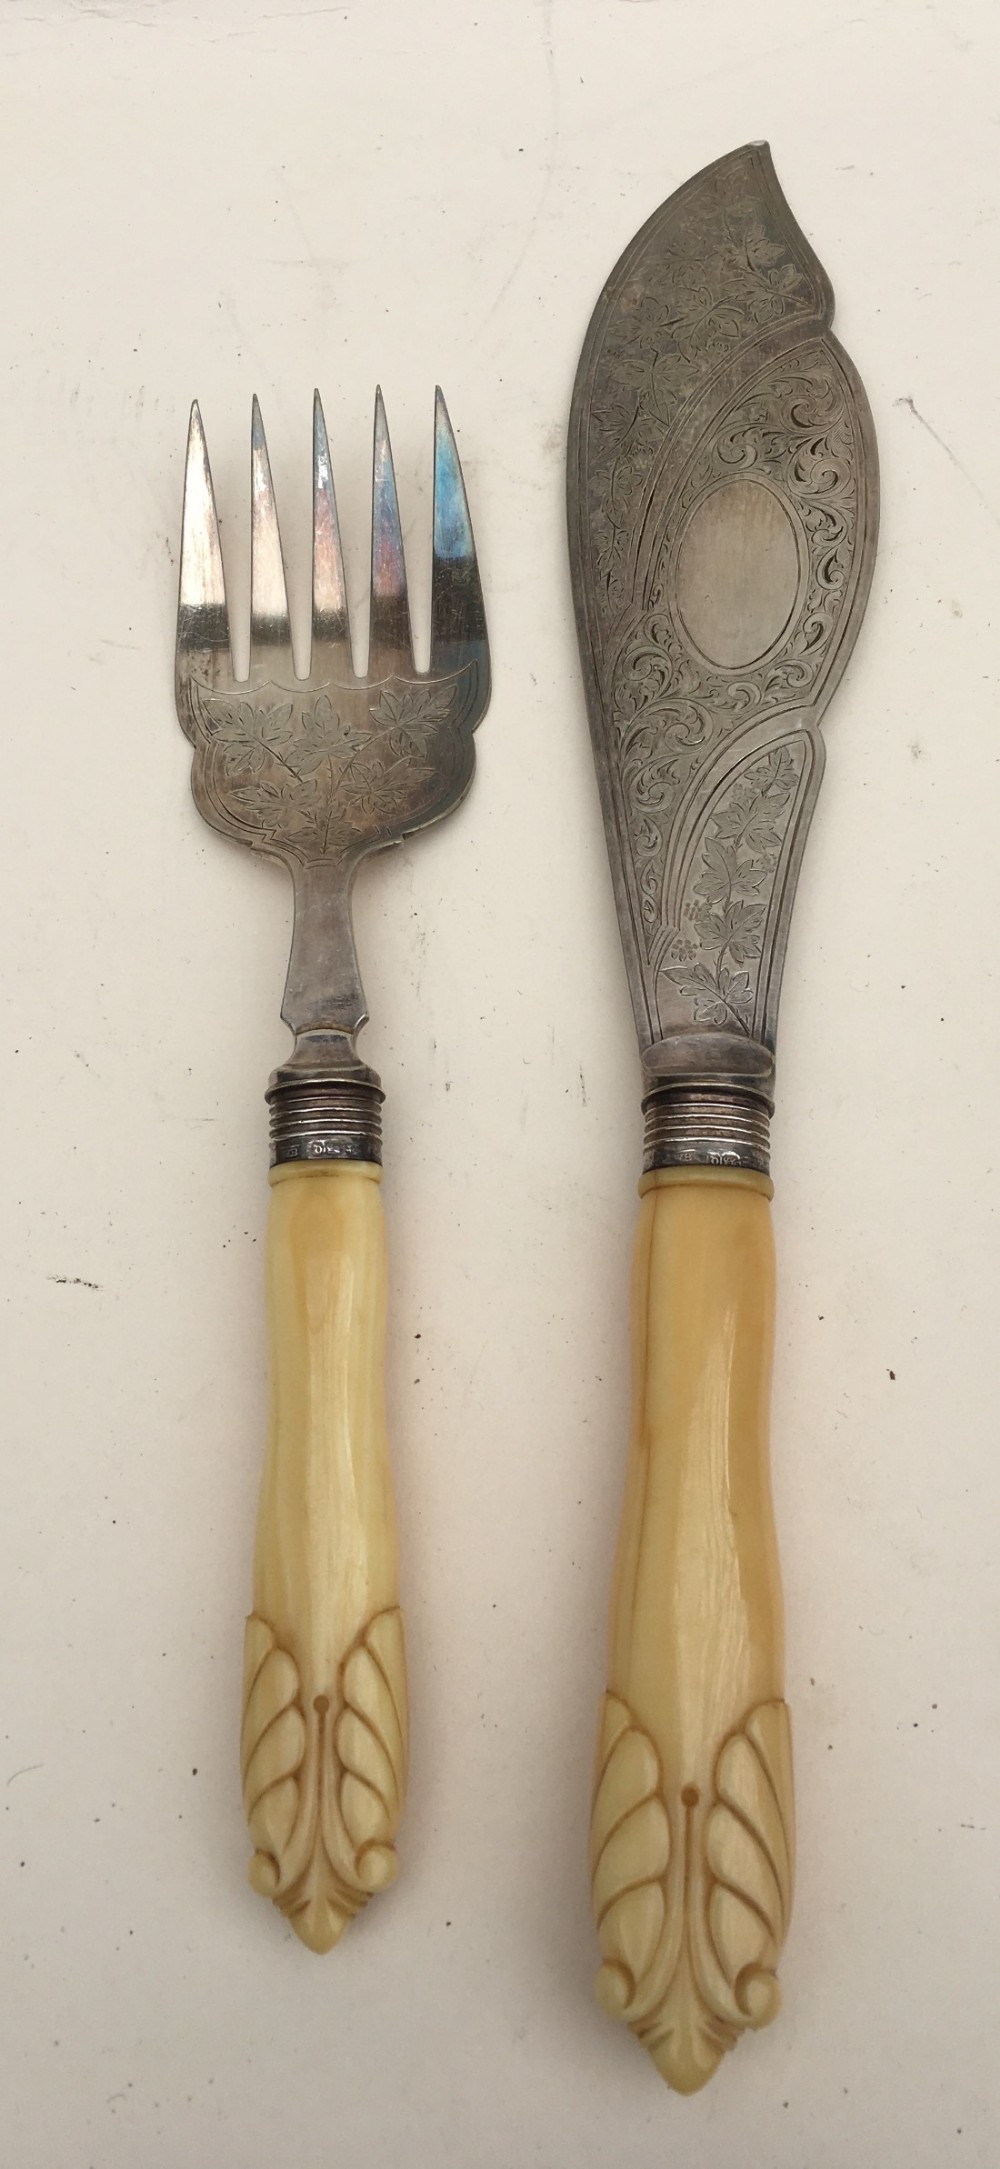 Pair Of Fish Servers Hm Silver Dollars And Ivory Handles, 469292